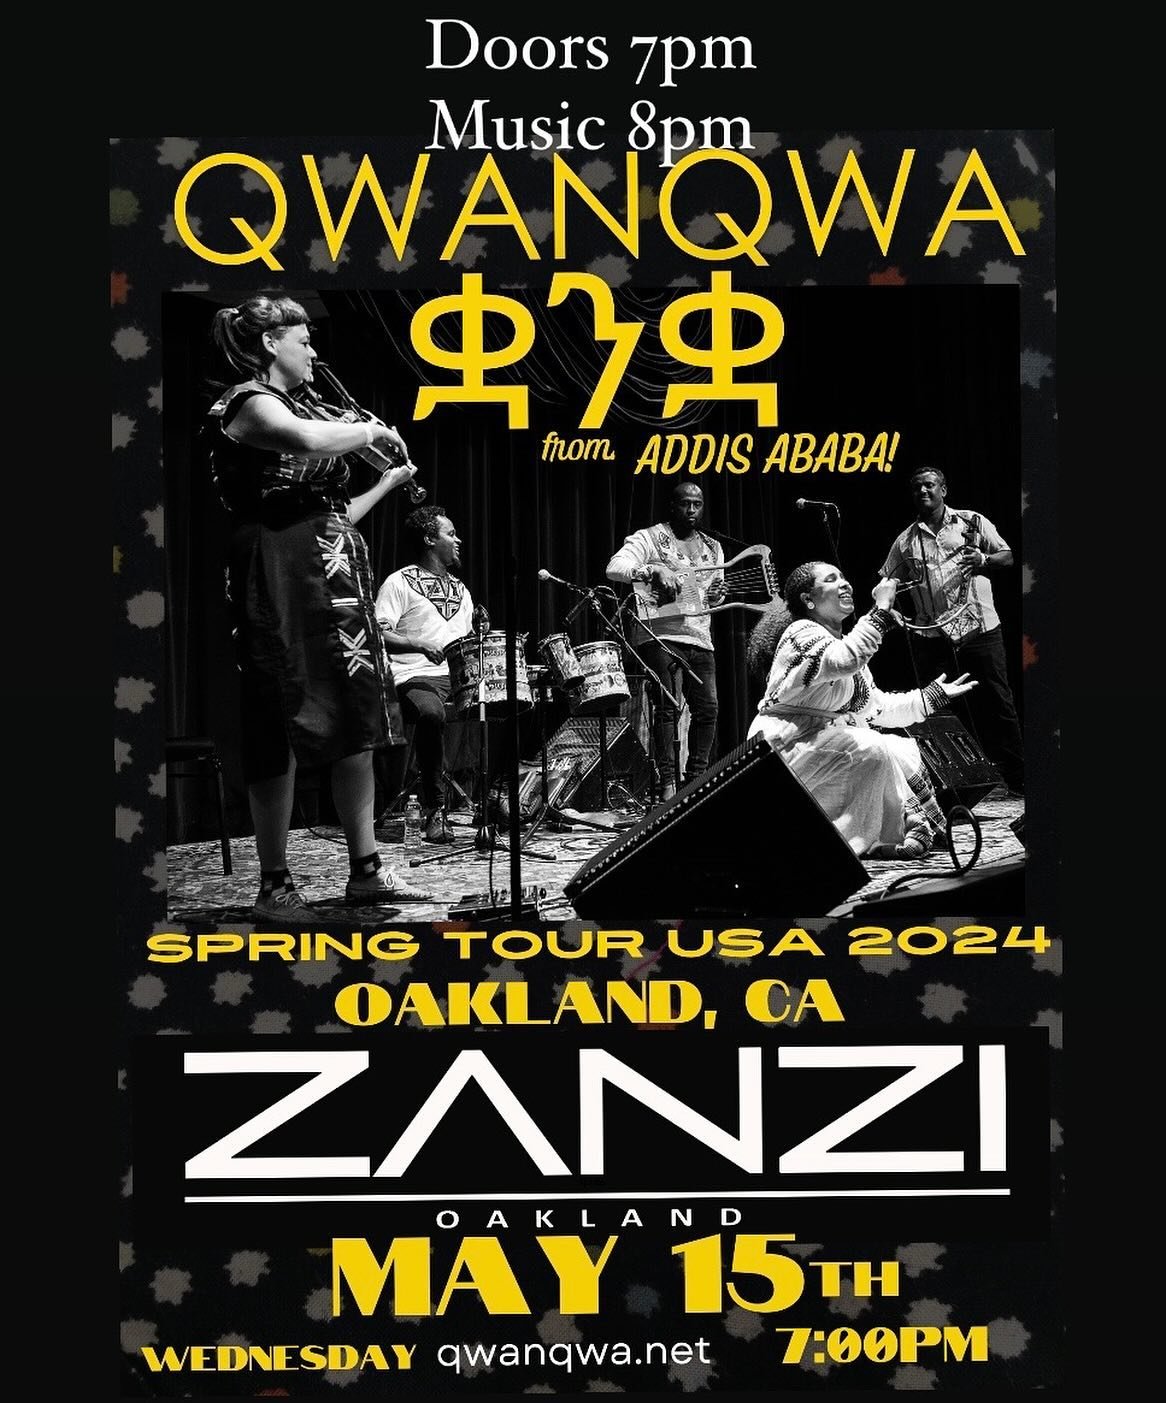 Tonight in Oakland, Qwanqwa great band from Addis Ababa, Ethiopia. Do not miss this.